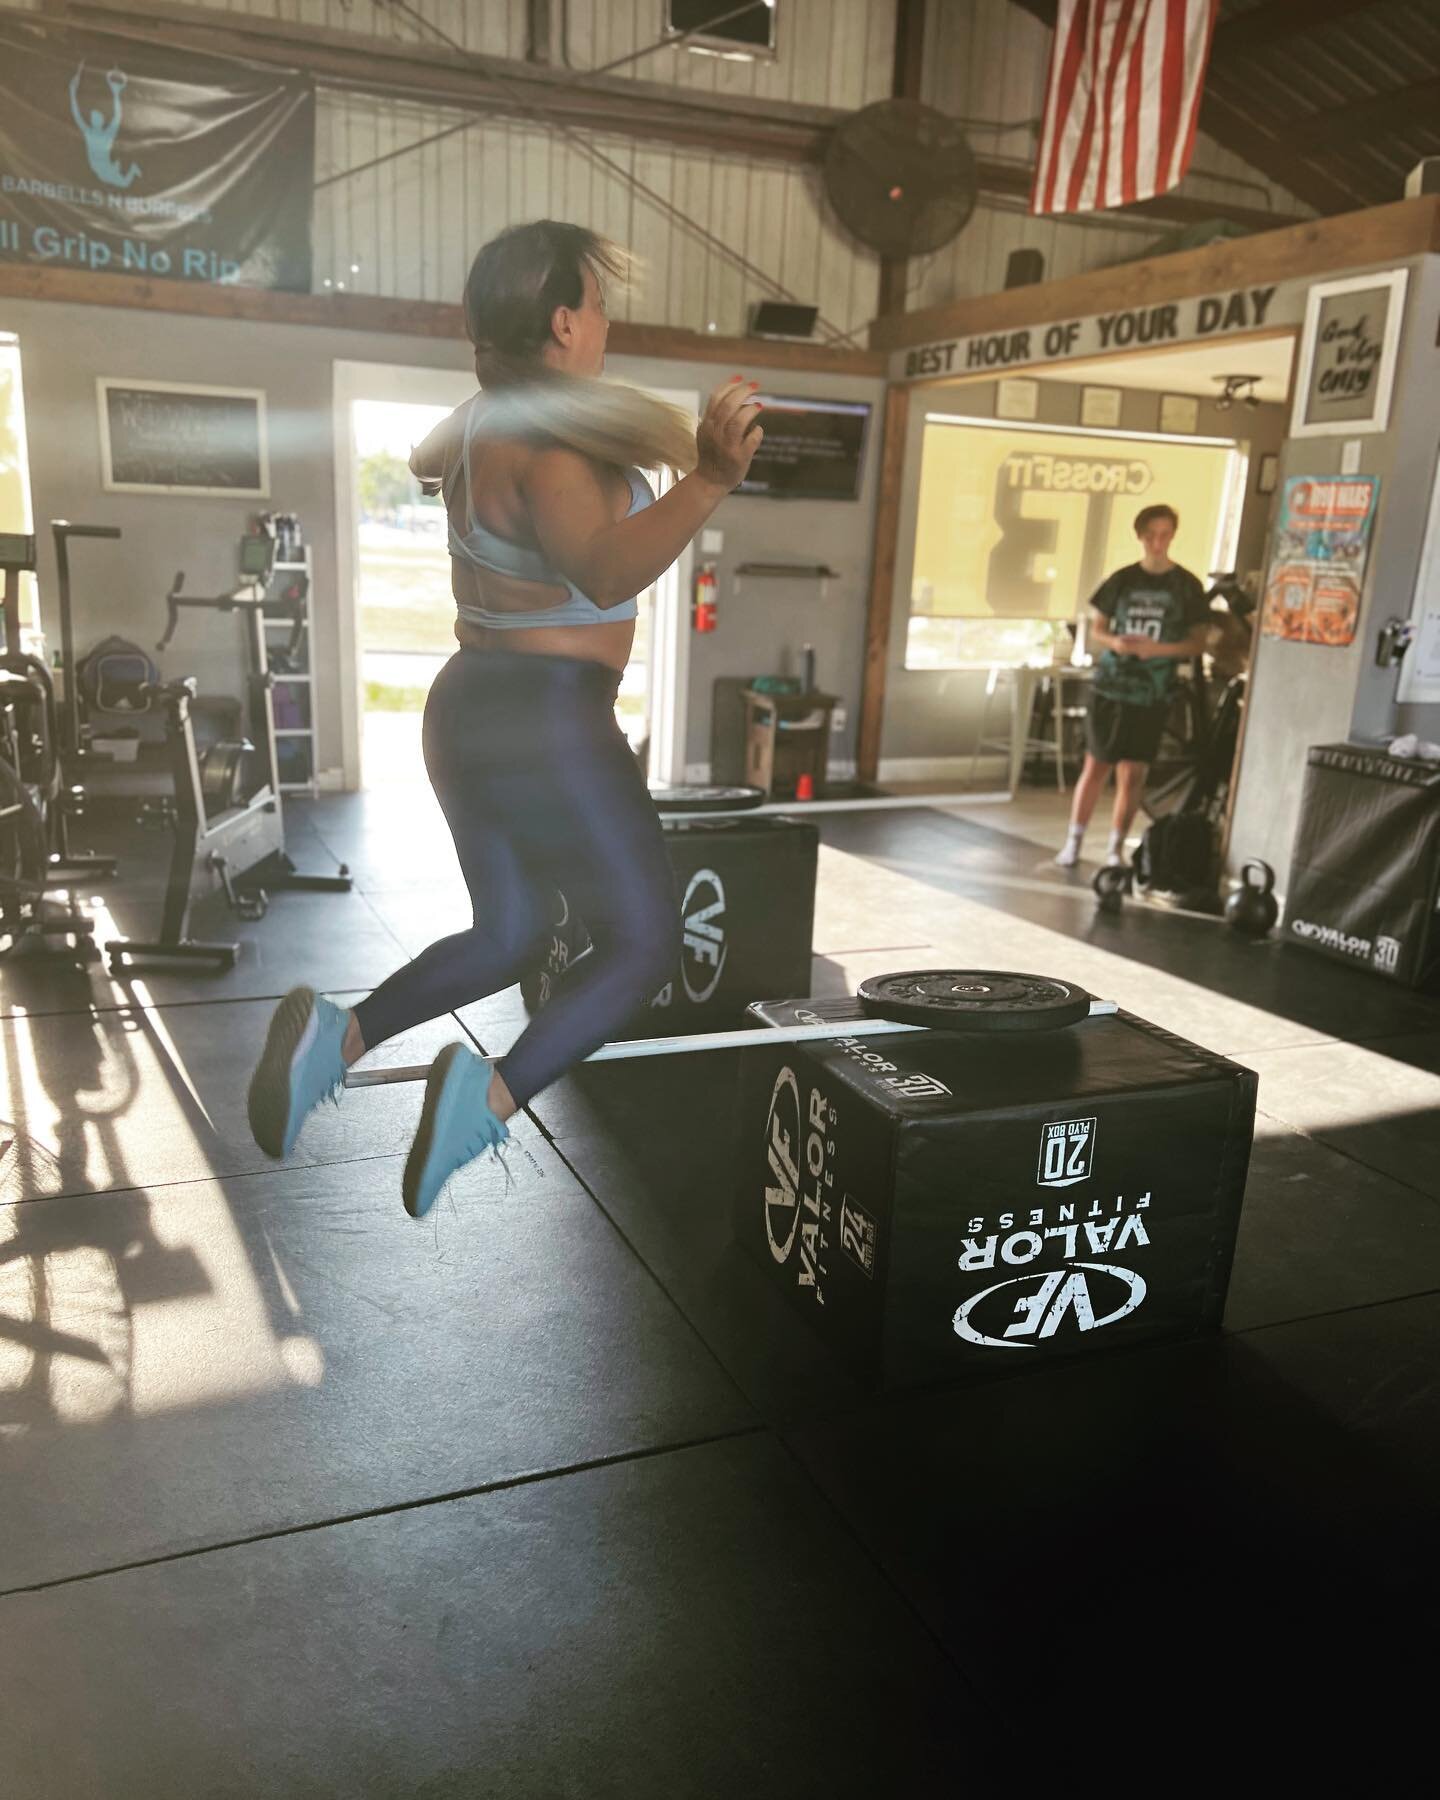 Happy Tuesday, CrossFitters! 💪🔥 It's time to kick things up a notch and push yourself to new heights. With challenging workouts that target every muscle group, CrossFit TFB is the perfect place to take your fitness to the next level. Come join us a